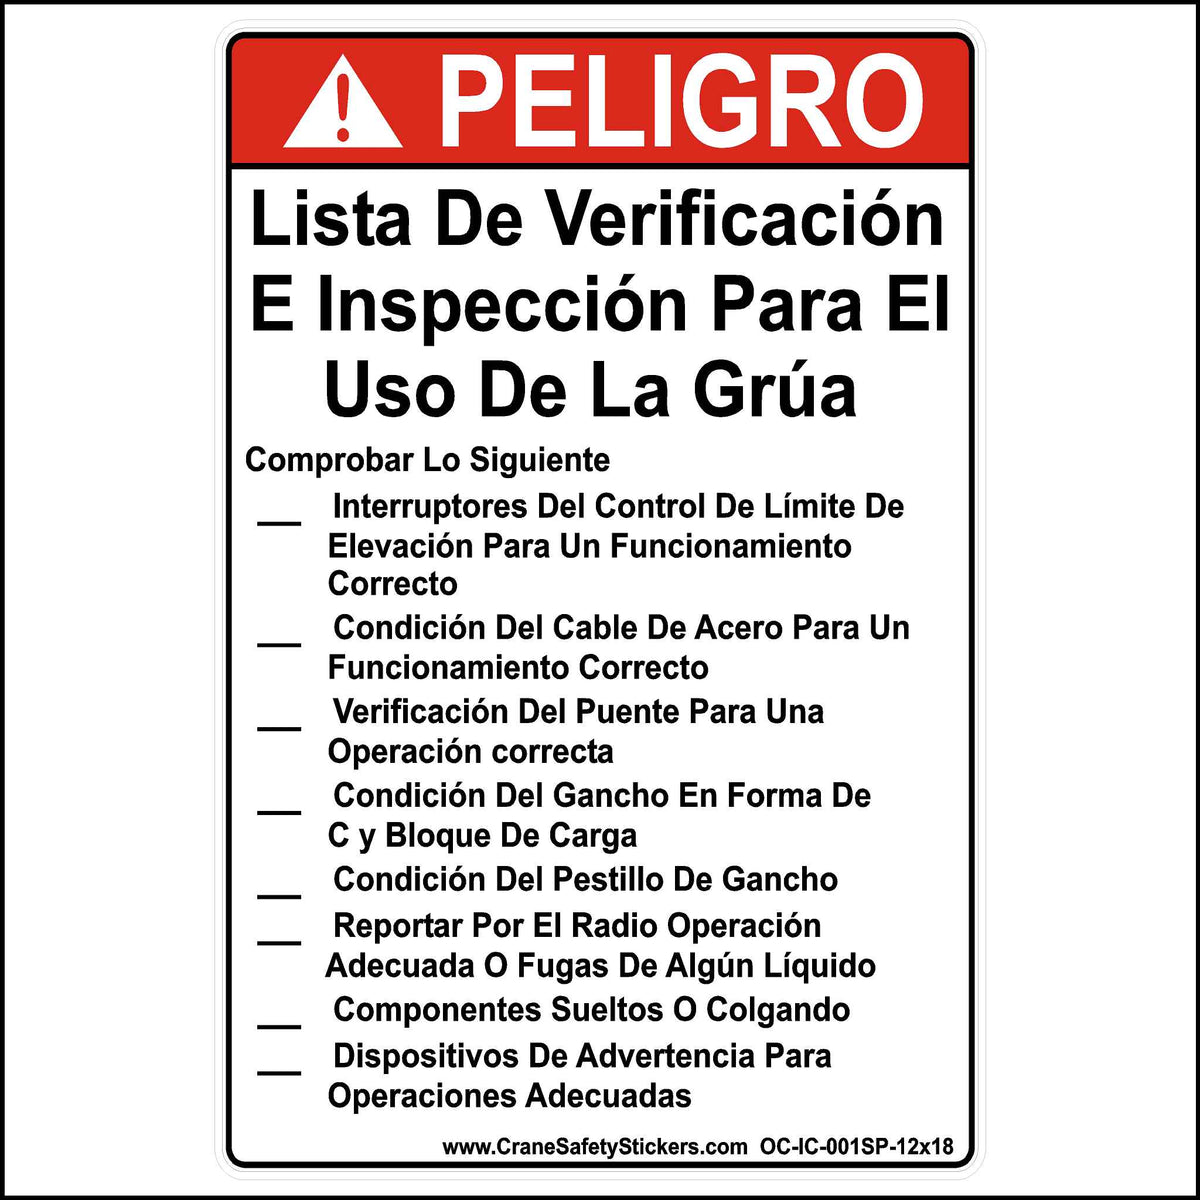 This Spanish 12 inch by 18 inch crane pre-use inspection checklist sticker is printed in white and red with black lettering reading, CRANE PRE-USE INSPECTION CHECKLIST CHECK THE... Hoist Limit Control Switches For Proper Operation. Wire Rope Condition Trolley For Proper Operation. Bridge For Proper Operation. C-Hook Condition Load Block. Hook and Latch Condition. Radio For Proper Operation Fluid Leaks. Loose or Hanging Components. Warning Devices For Proper Operation.